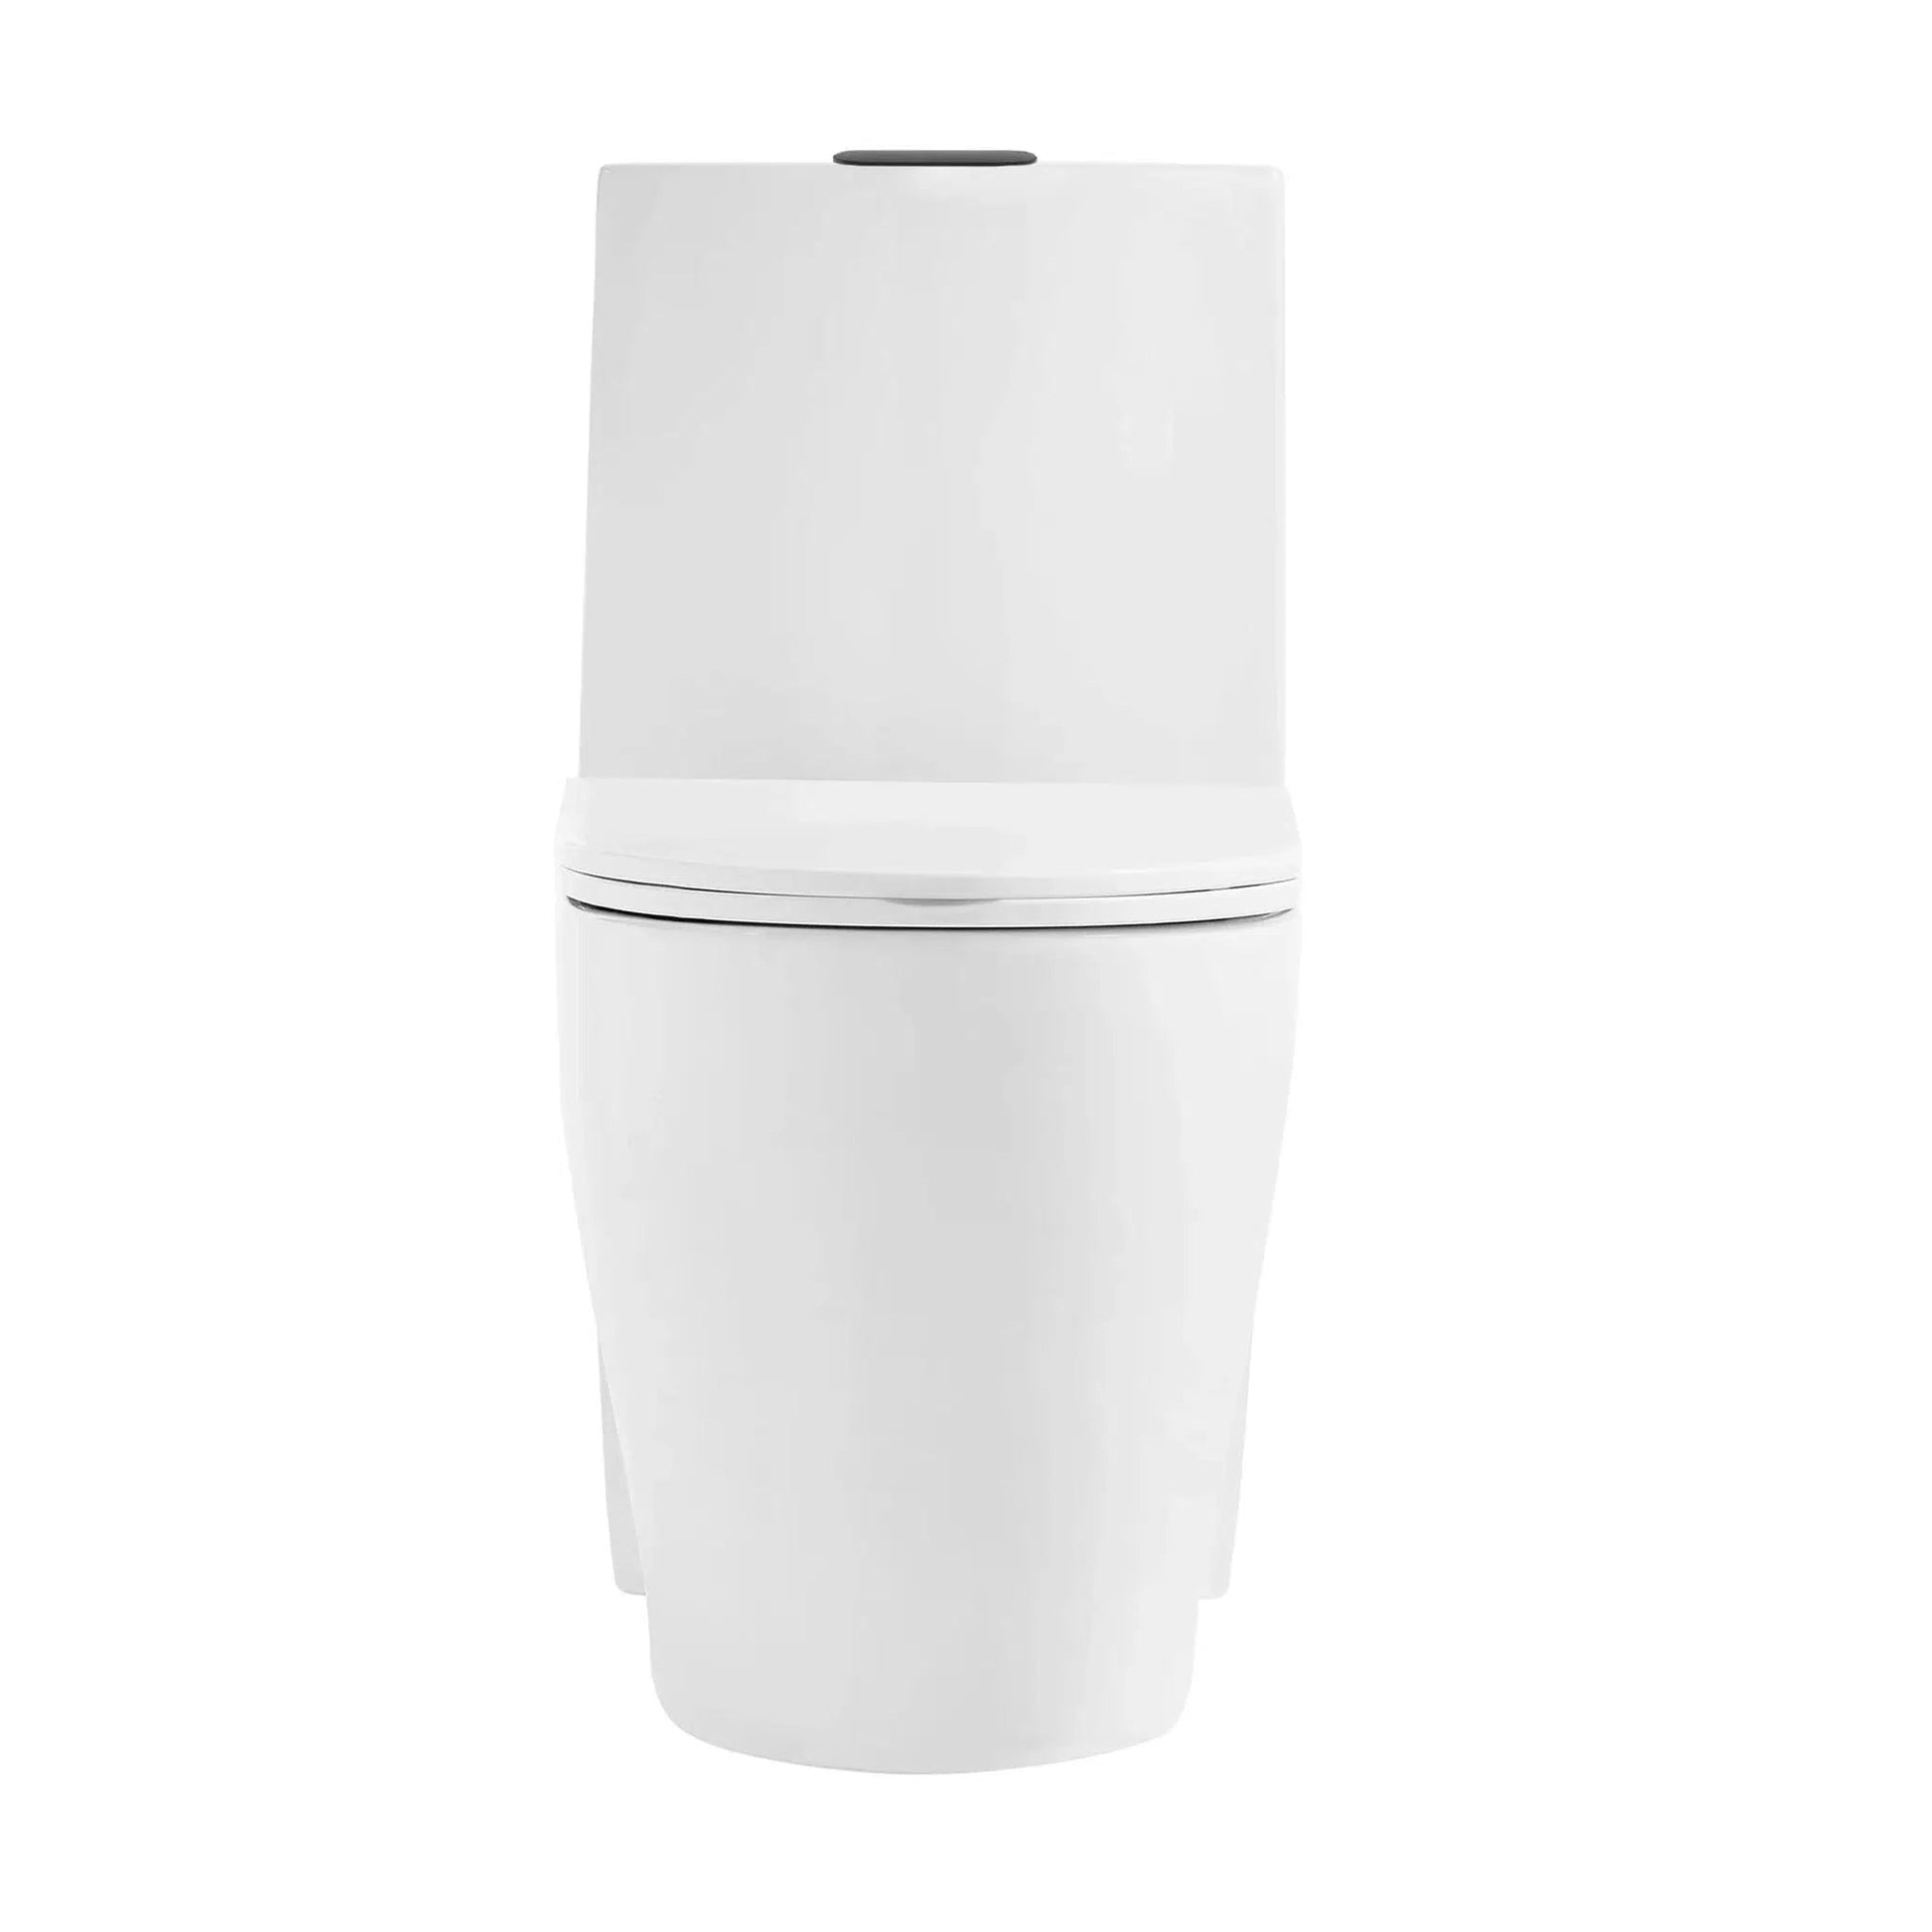 Swiss Madison St. Tropez 15" x 31" White One-Piece Elongated Floor Mounted Toilet With Black Hardware and 1.1/1.6 GPF Vortex™ Dual-Flush Function